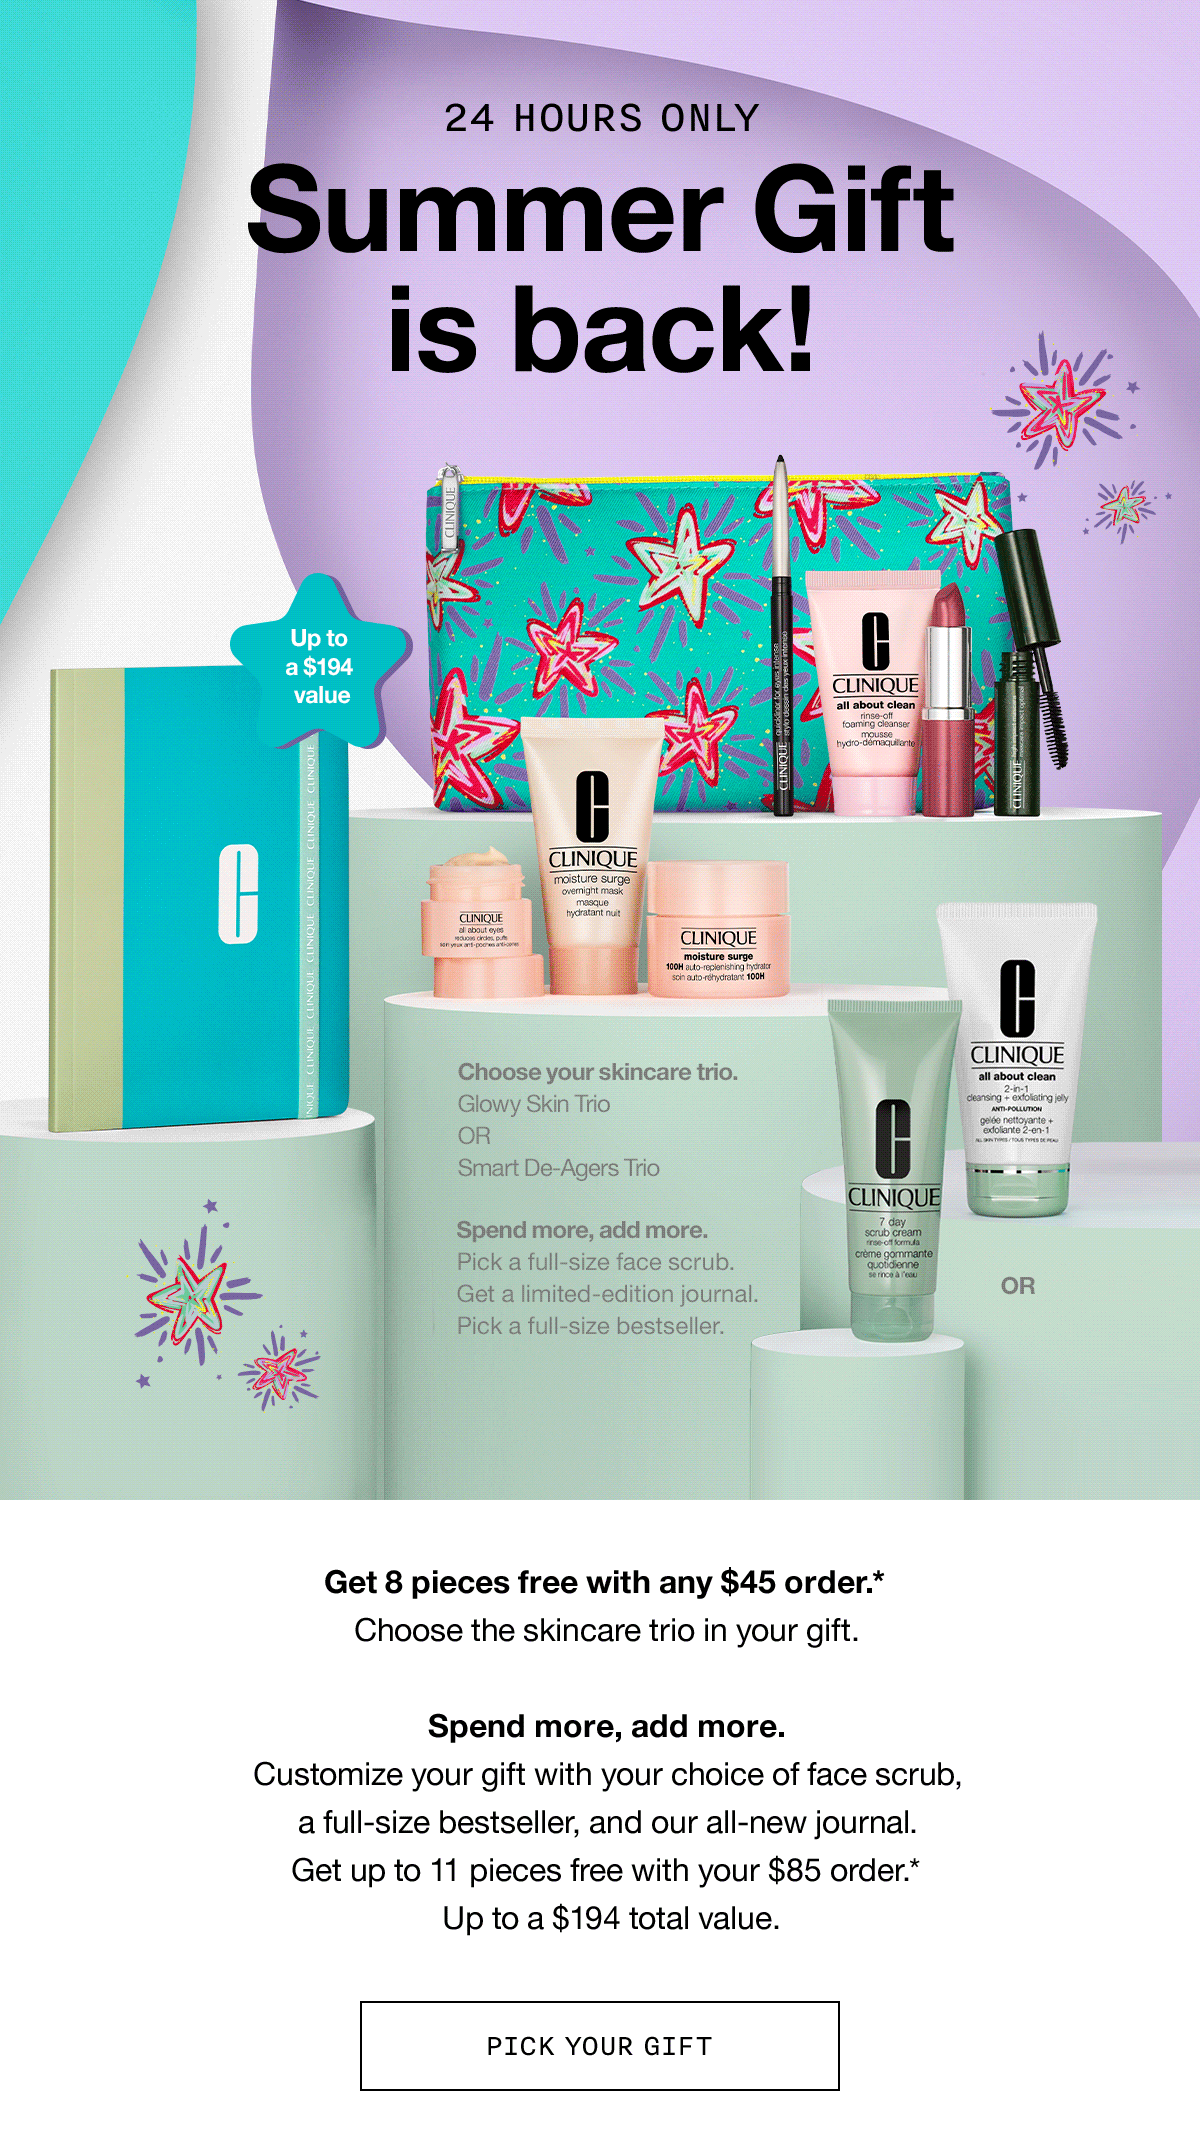 24 HOURS ONLY | Summer Gift is back! | Get 8 pieces free with any $45 order.* Choose the skincare trio in your gift. Spend more, add more. Customize your gift with your choice of face scrub, a full-size bestseller, and our all-new journal. Get up to 11 pieces free with your $85 order.* Up to a $194 total value. | PICK YOUR GIFT